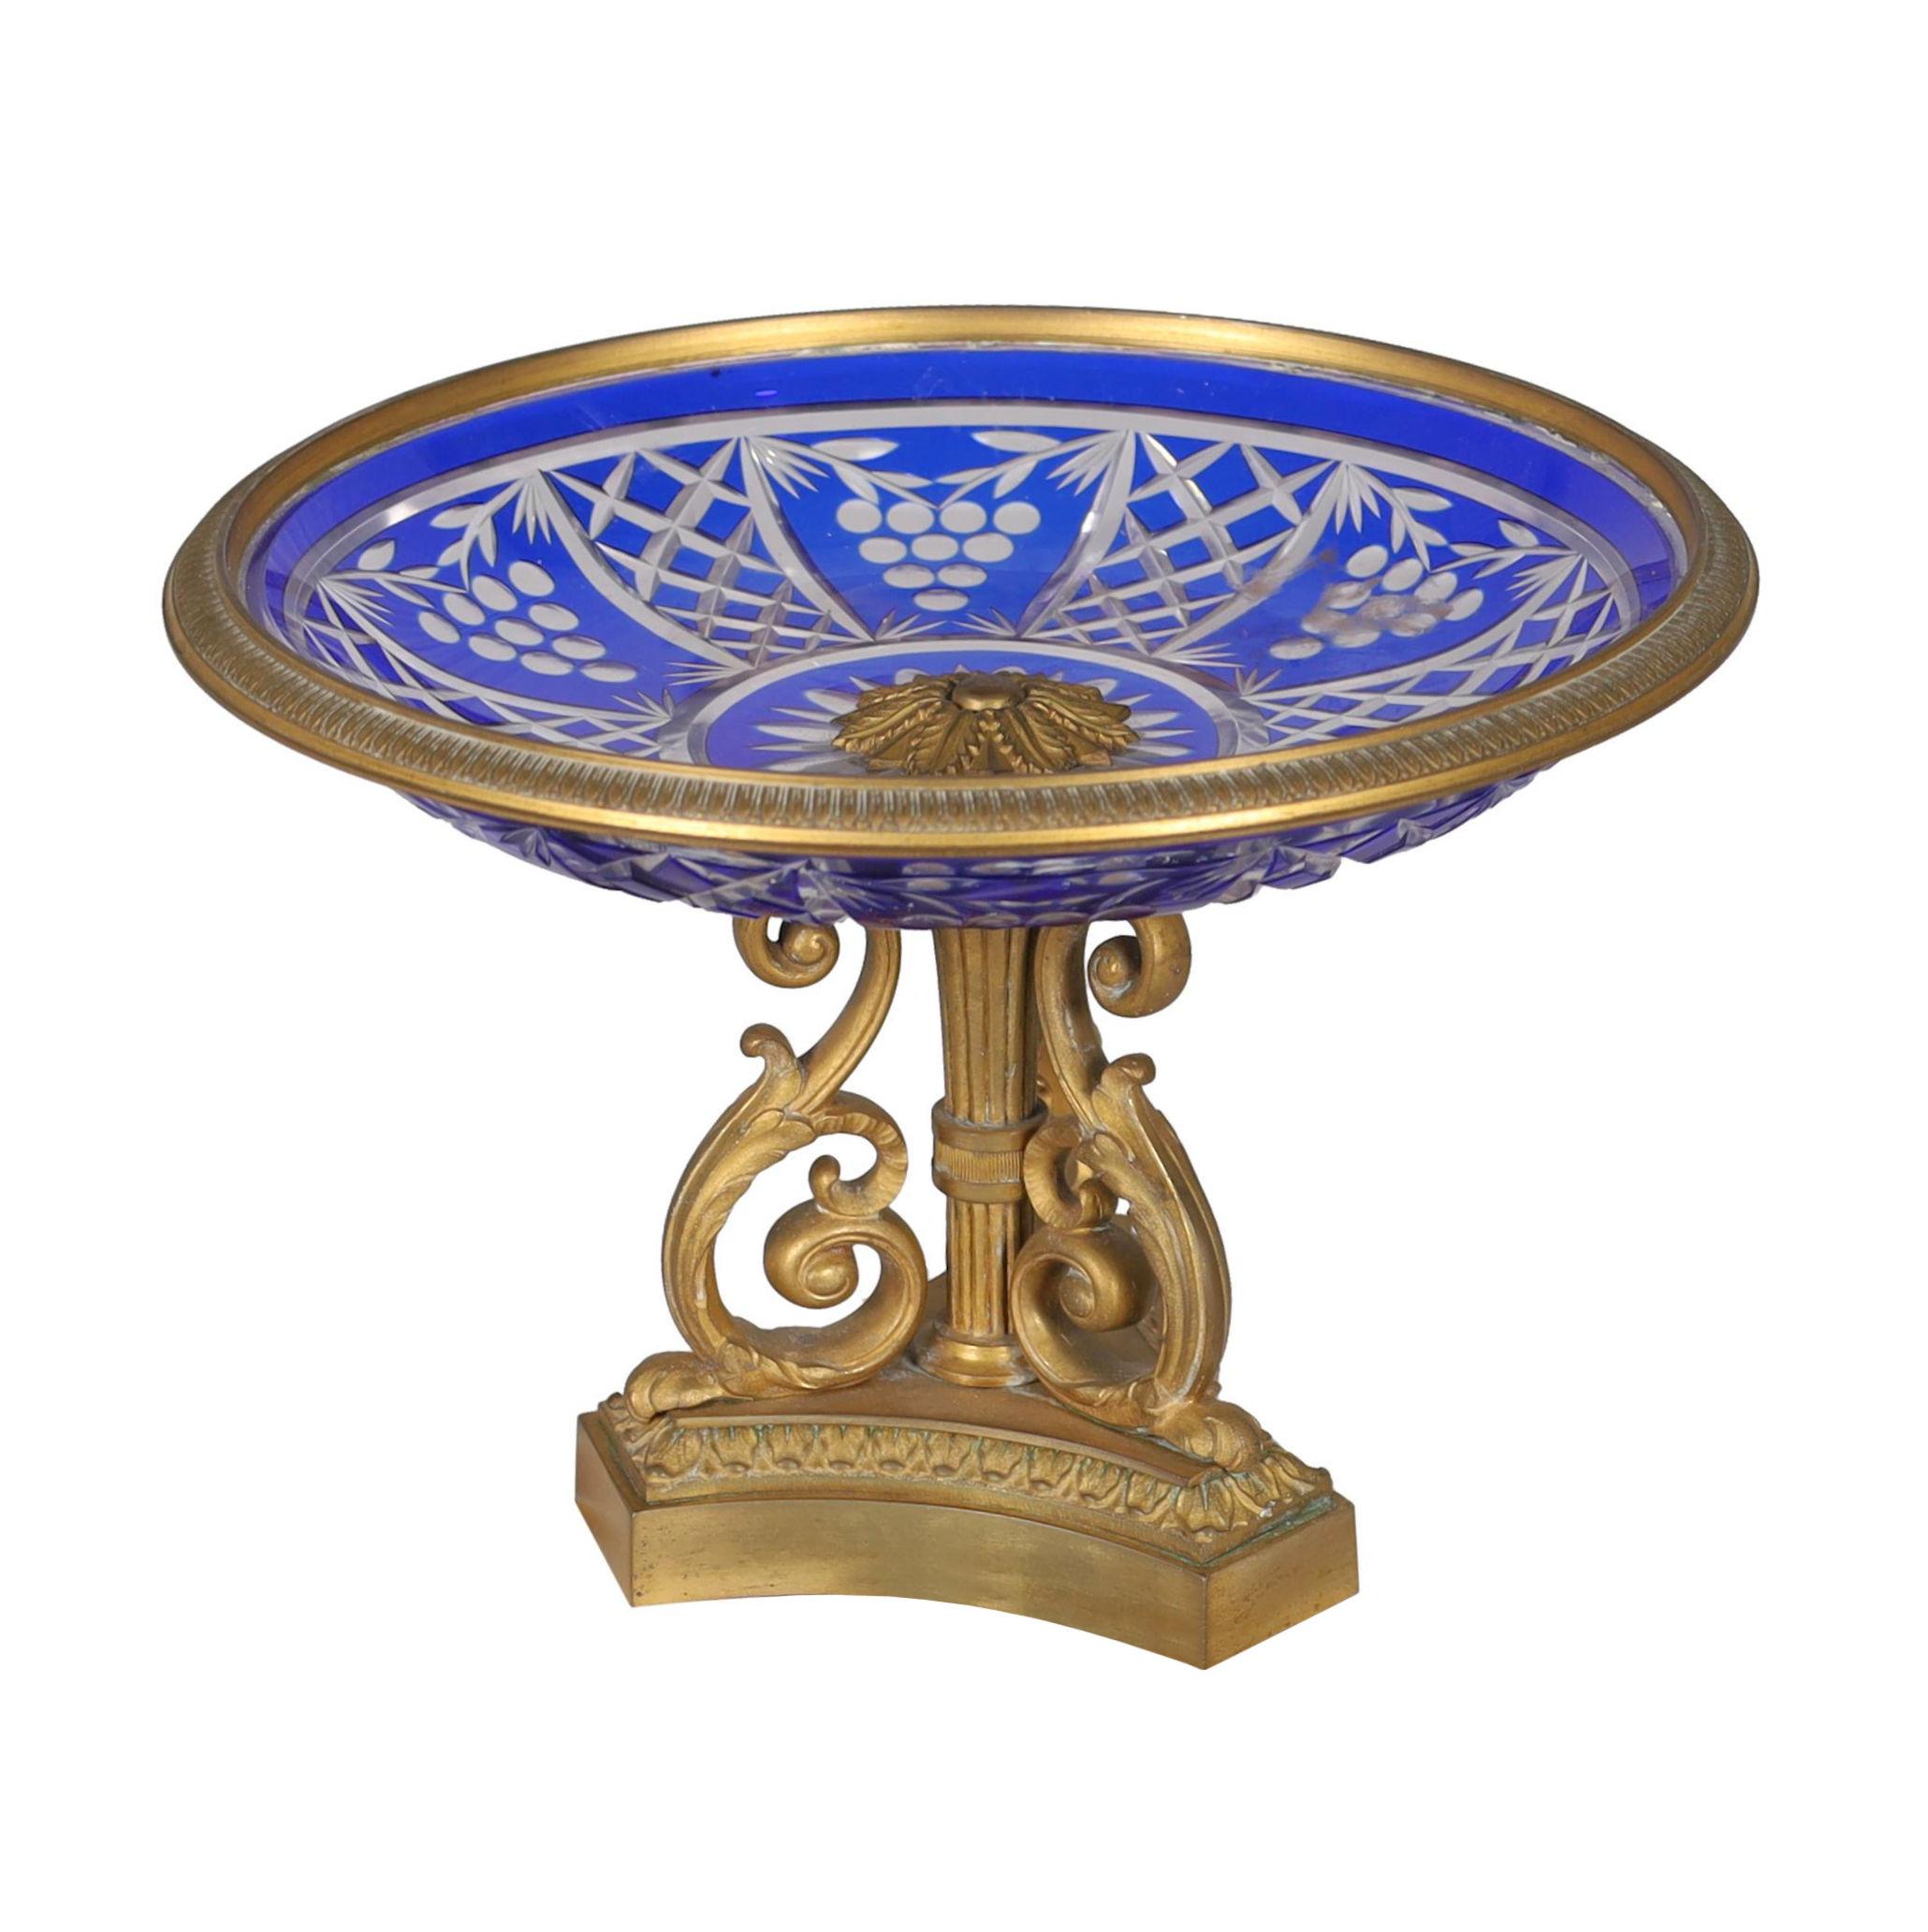 Our pair of antique (late 19th century) compotes in the neoclassical style with gilt bronze frame and cobalt blue flashed and clear glass bowls have engraved designs of latticework and stylized grape bunches.   Each in good condition.